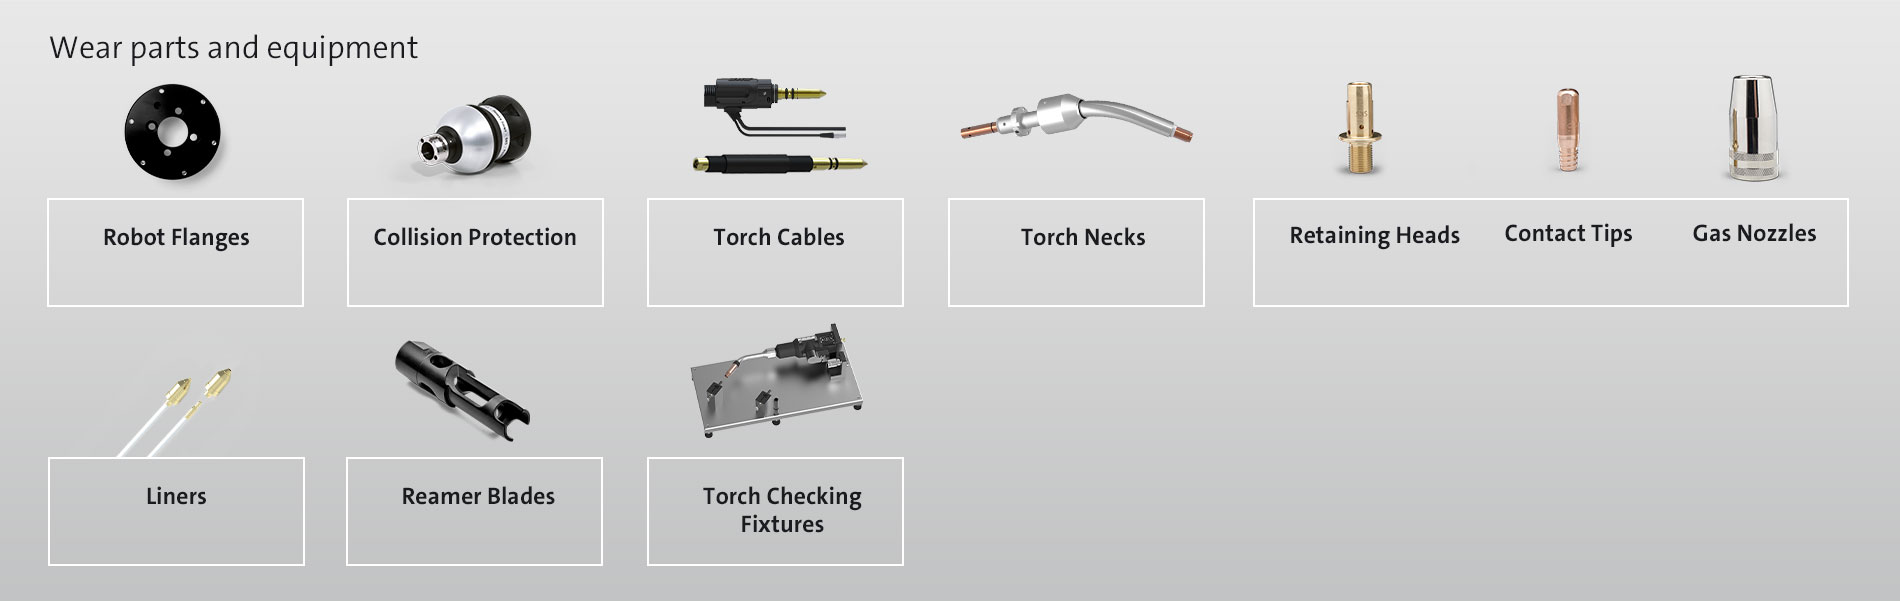 SKS torch system equipment: collision protection, torch cables, torch necks, liners, retaining heads, contact tips, gas nozzles, reamer blades, checking fixtures